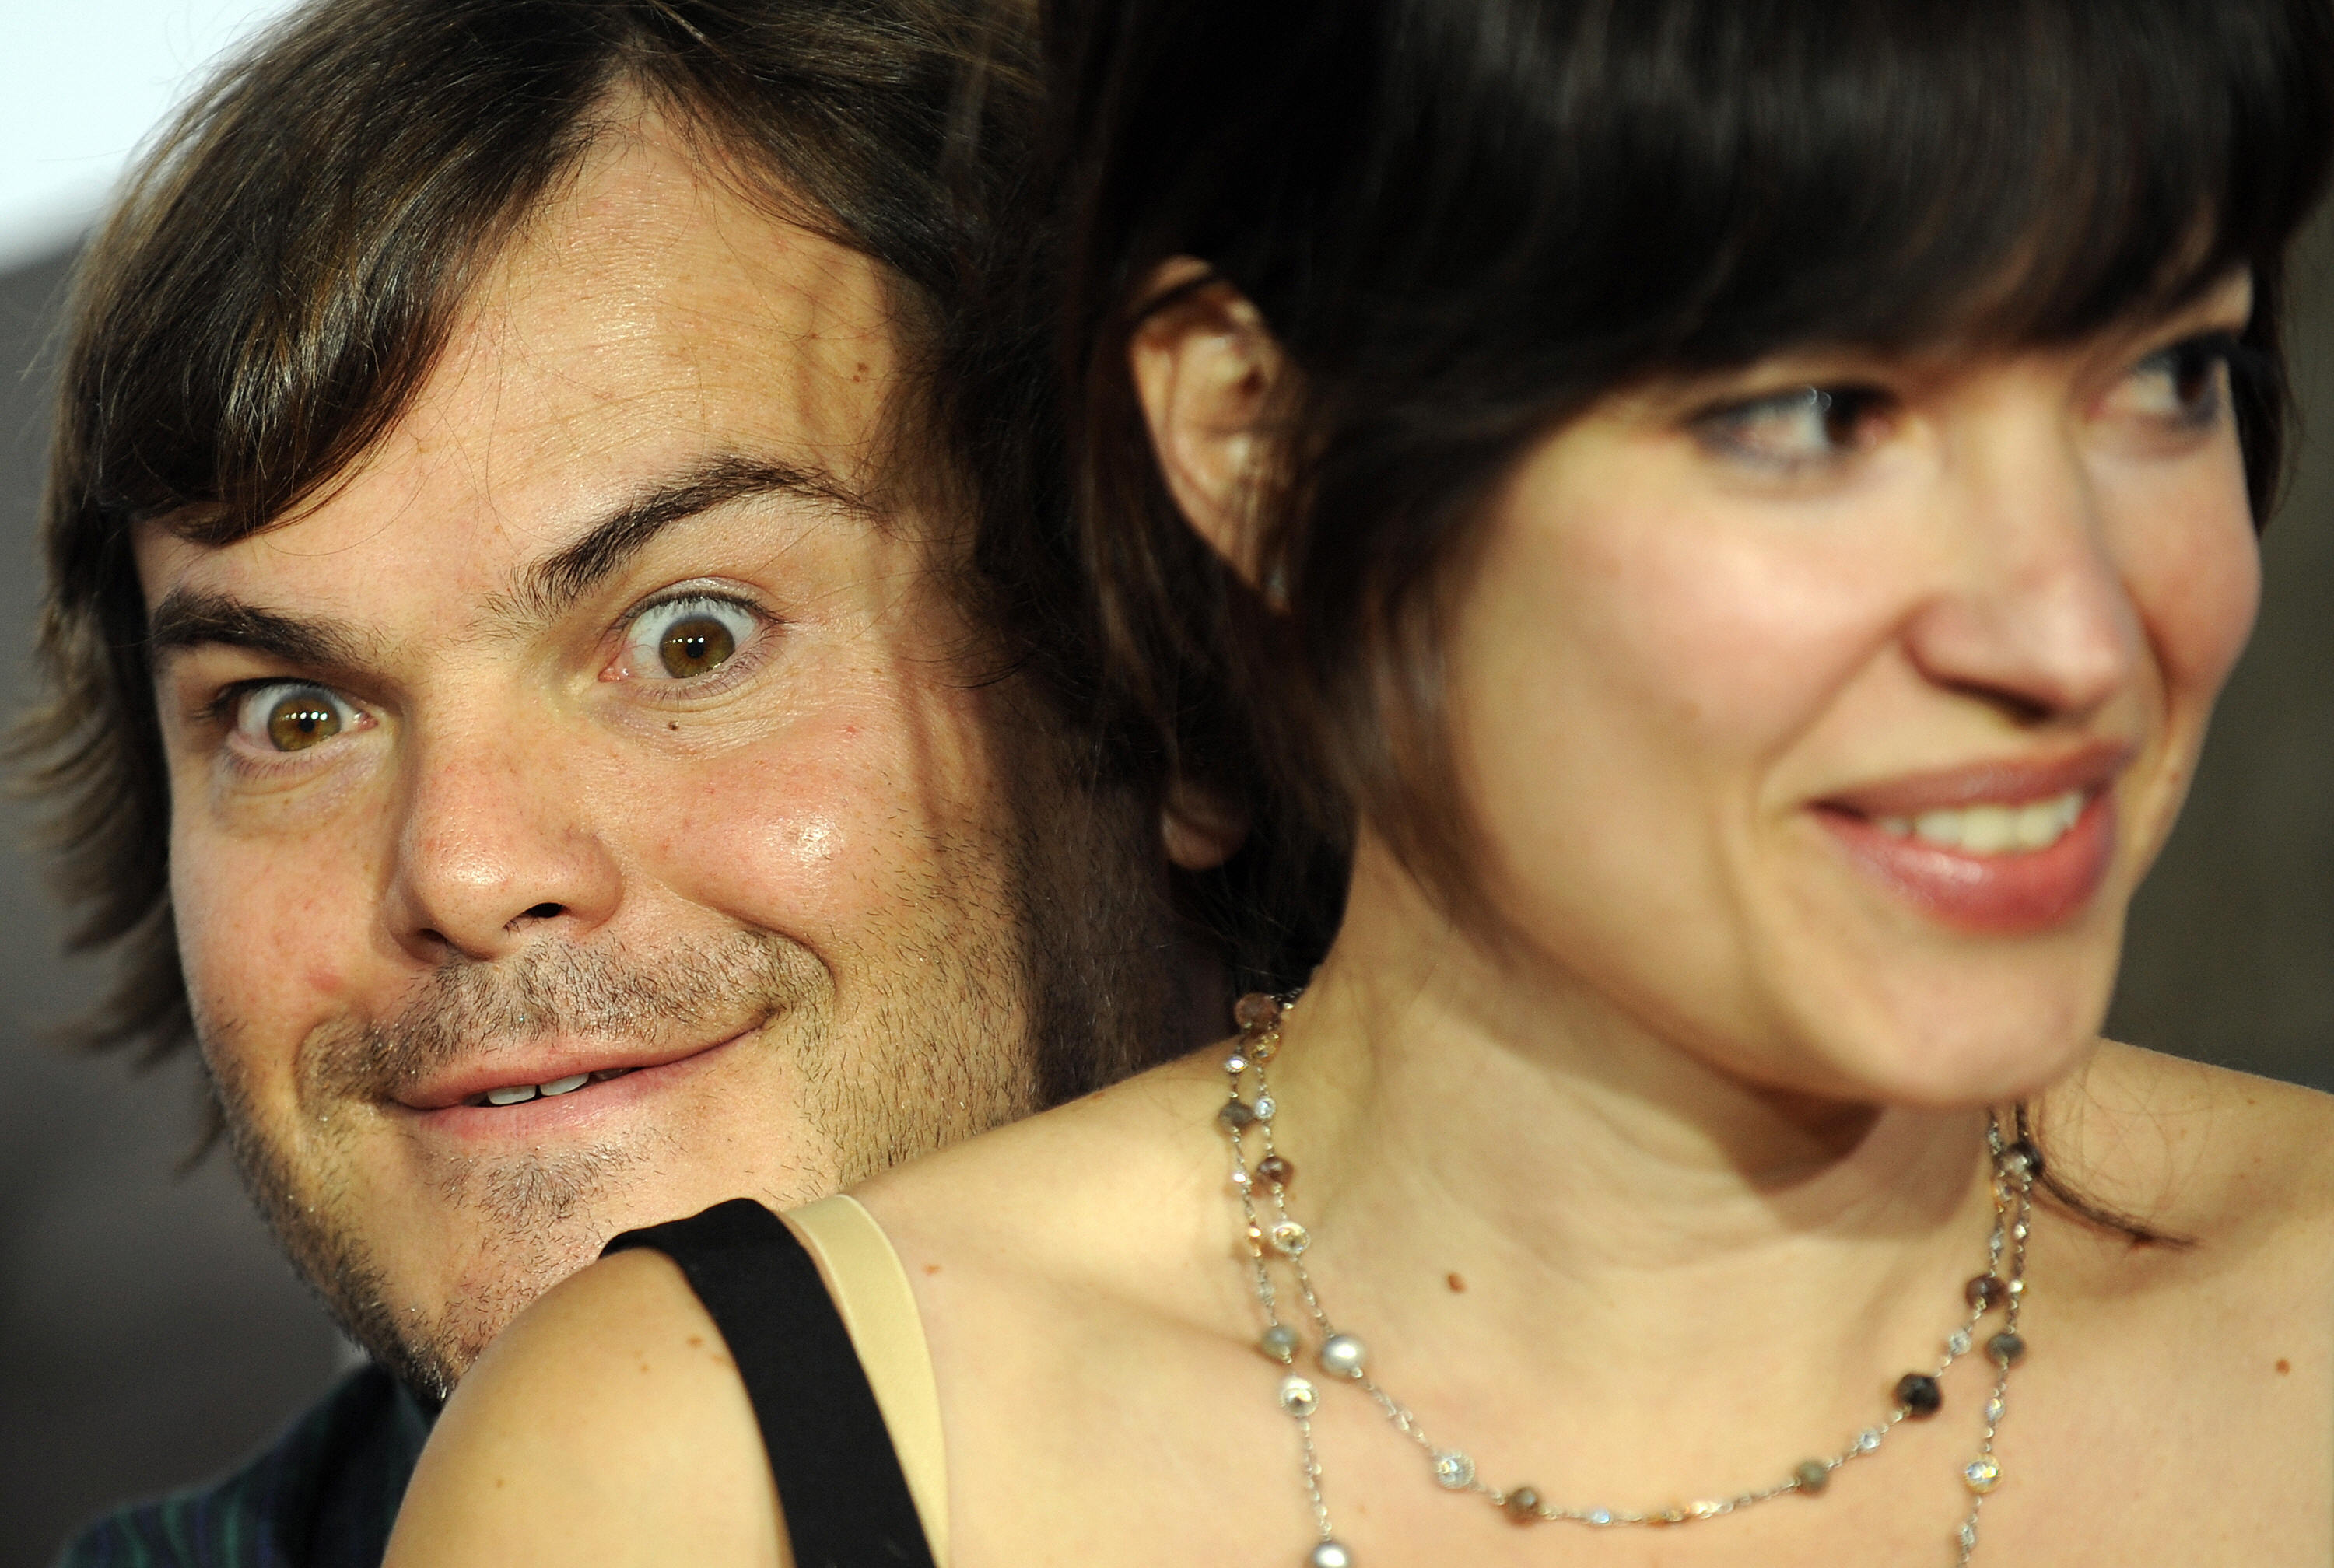 Jack Black with his wife, actress Tanya Haden, at the premiere of "I Love You, Man" at Mann's Village Theater in Westwood, California, on March 17, 2009 | Source: Getty Images